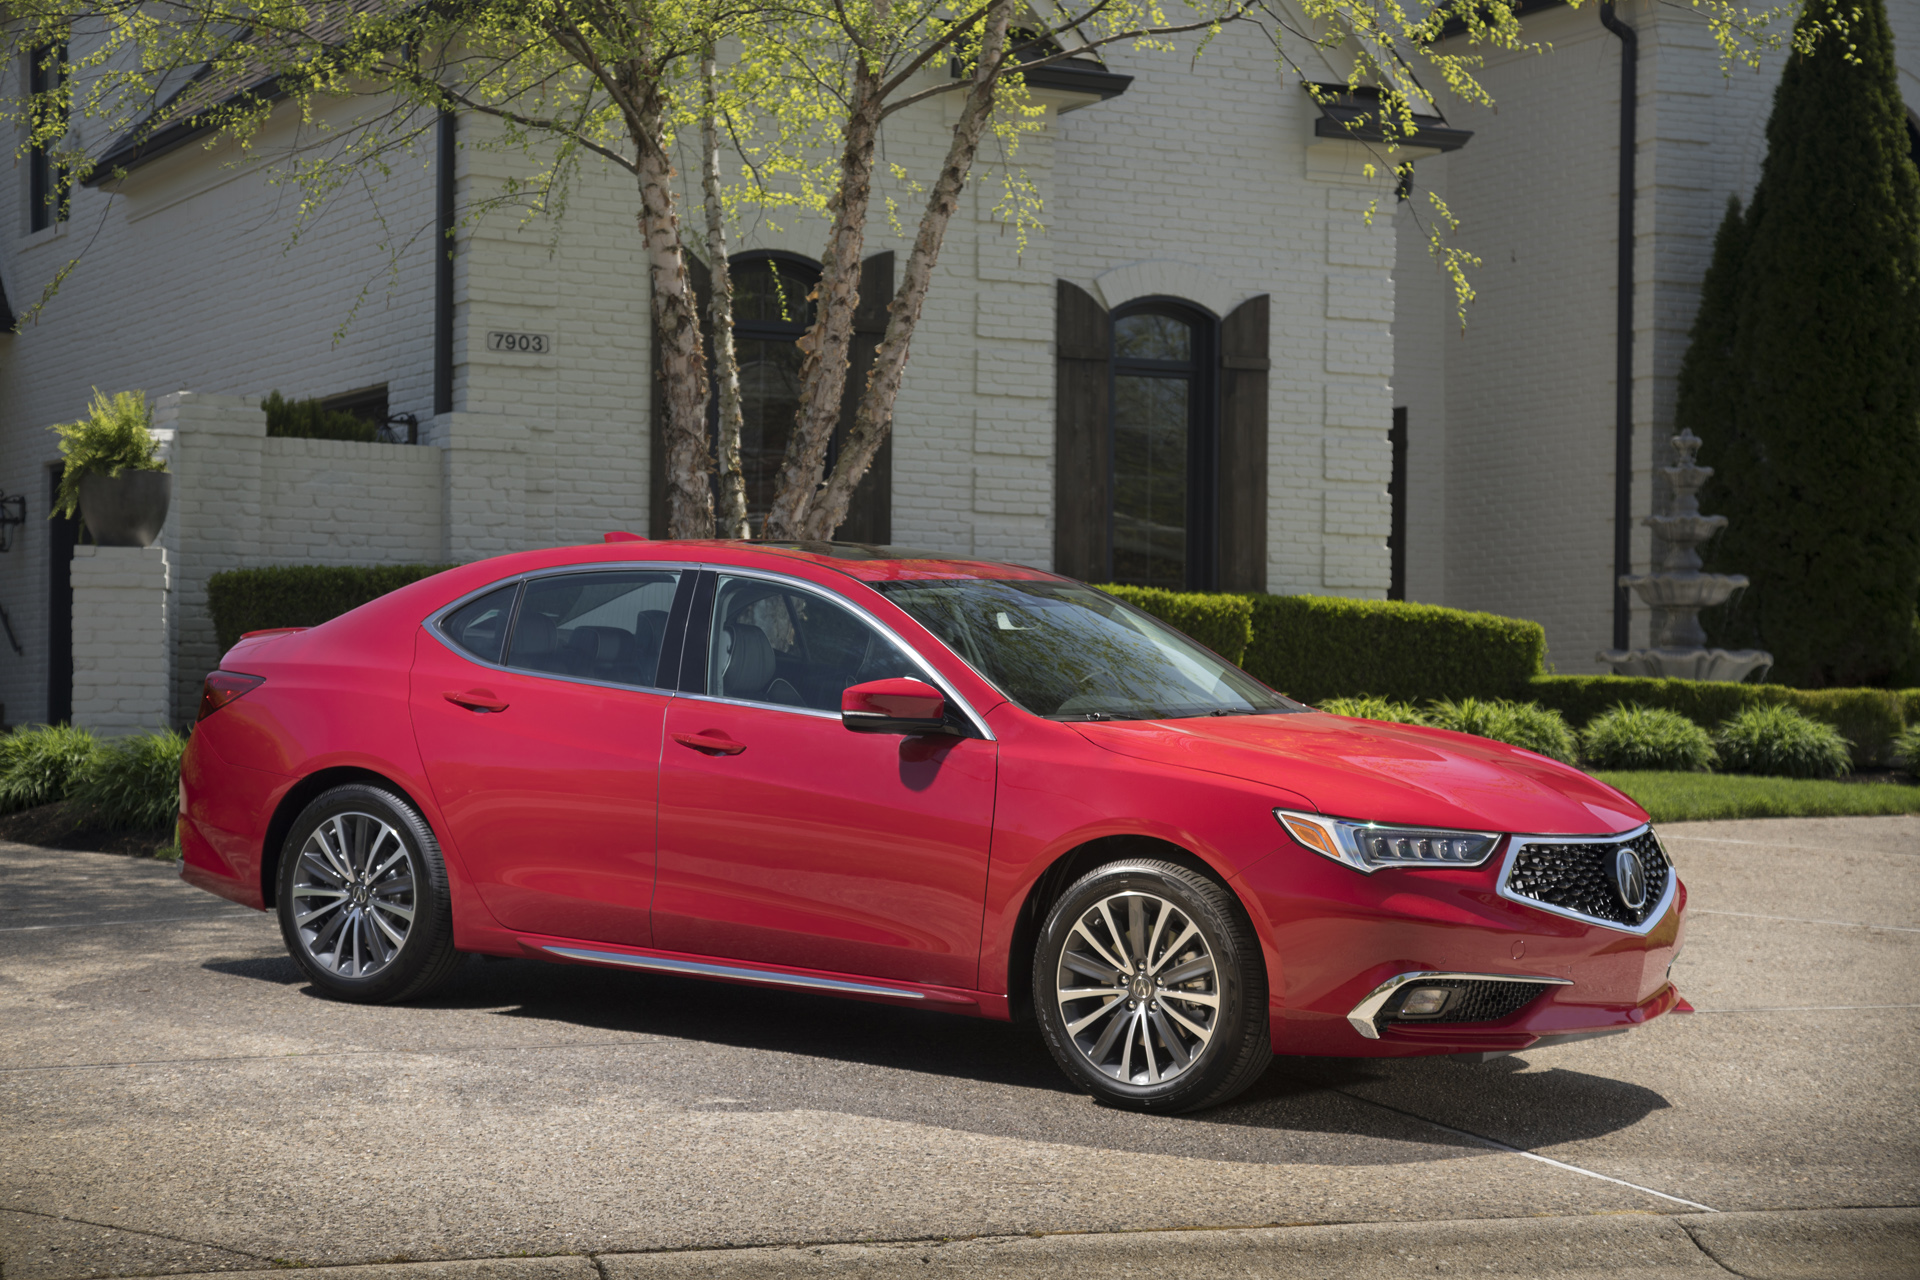 2018 Acura TLX Performance Review - The Car Connection